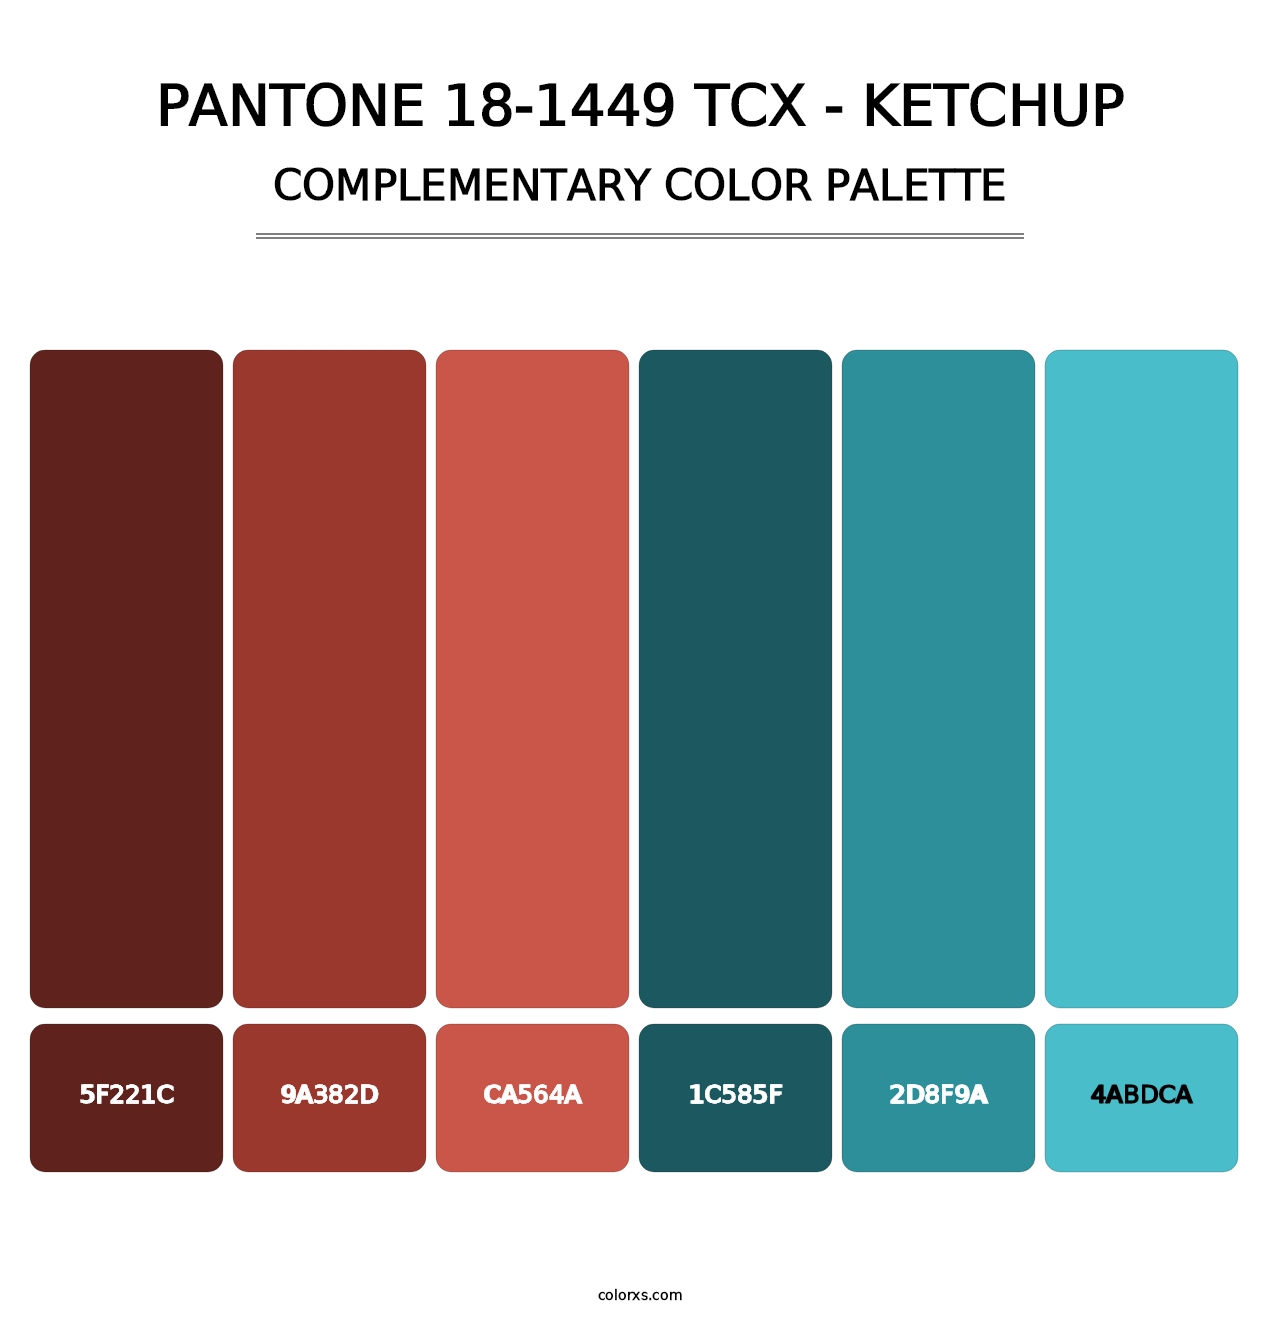 PANTONE 18-1449 TCX - Ketchup - Complementary Color Palette